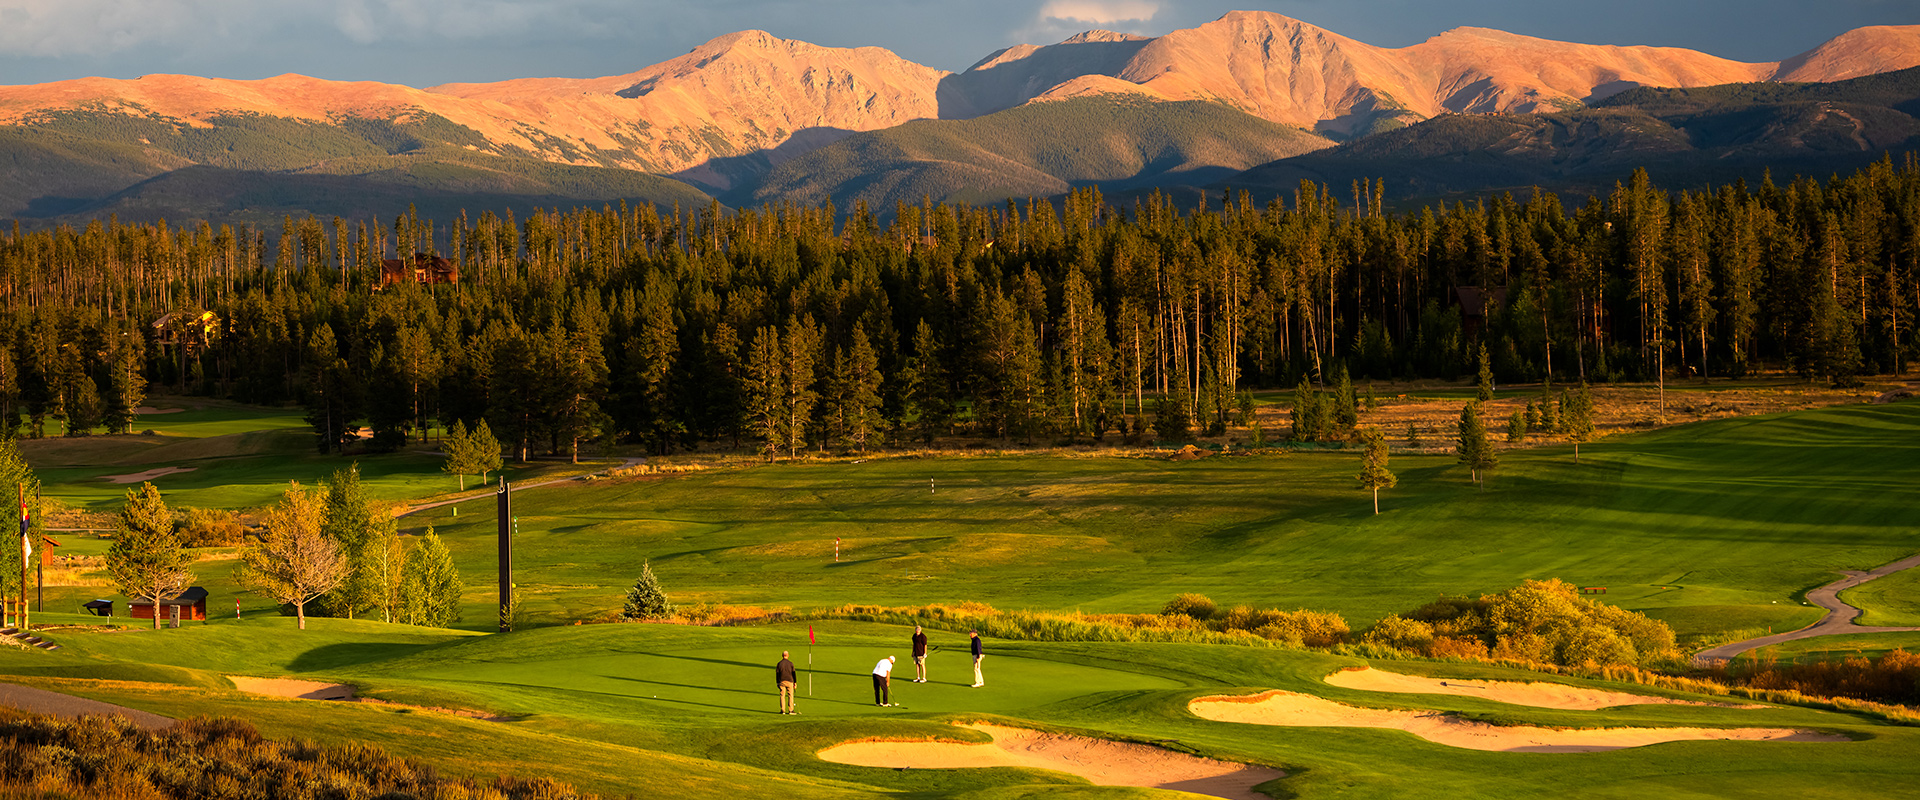 A group of golfers putting on a green at Pole Creek Golf Club during a captivating sunset.